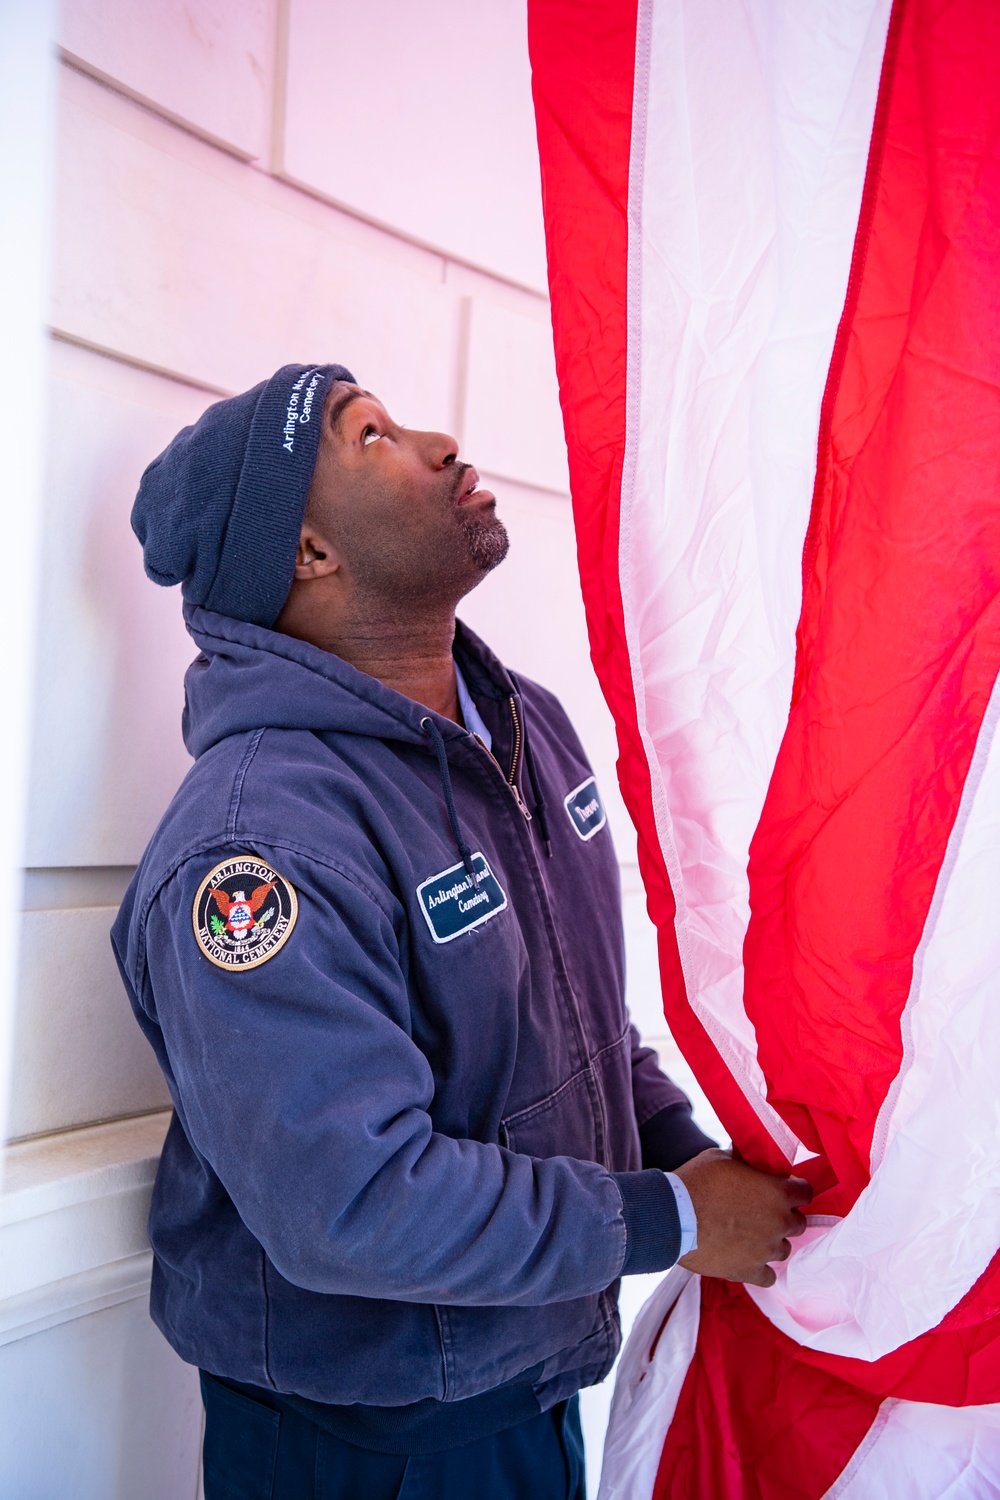 U.S. Flags are Hung in the Memorial Amphitheater in Preparation for Veterans Day